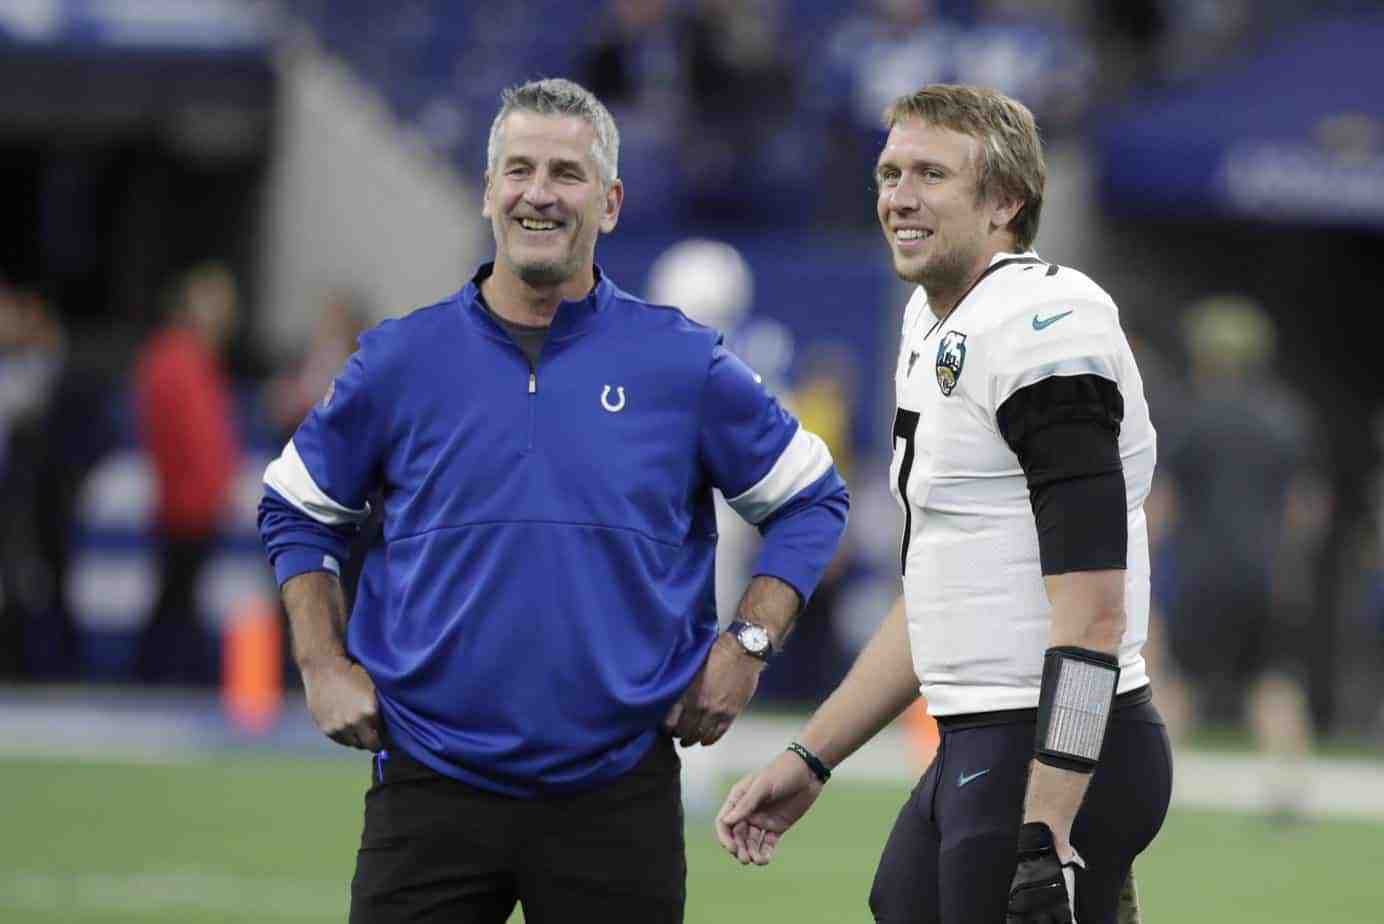 Chicago Bears quarterback Nick Foles spoke on the potential of a reunion with Frank Reich on the Colts after Carson Wentz has opted for foot surgery